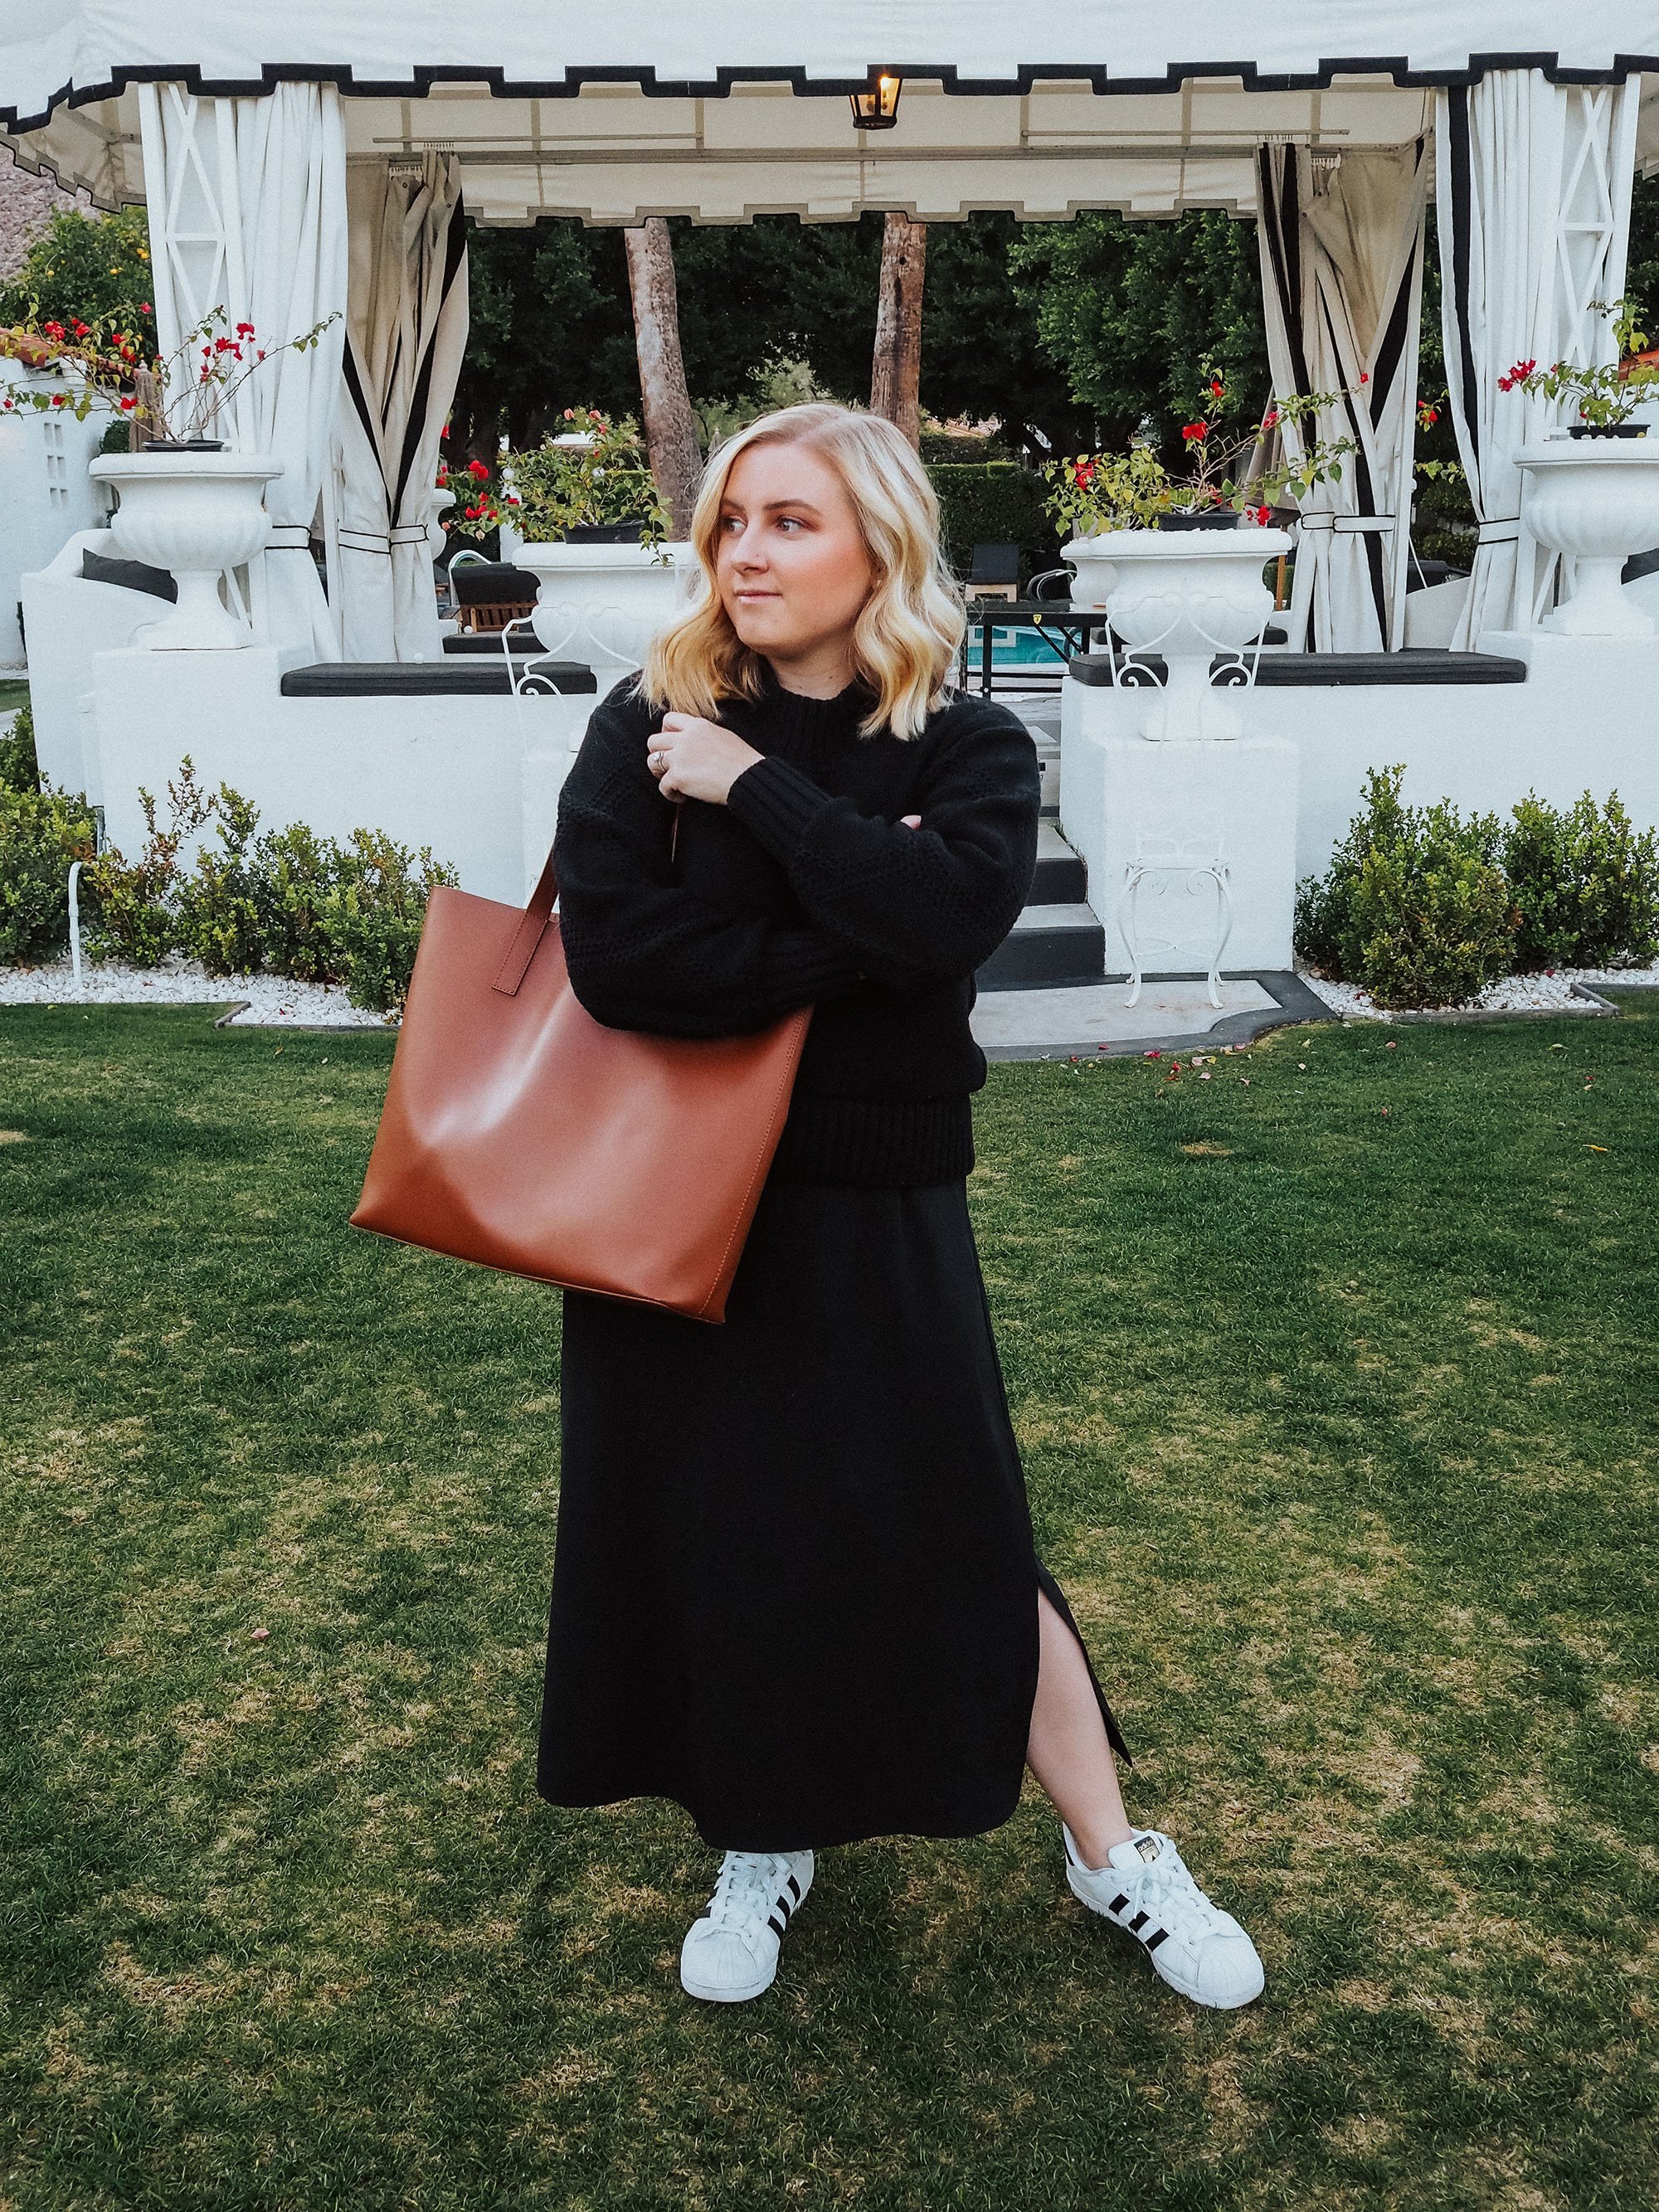 The New Day Market Tote Chocolate – Everlane